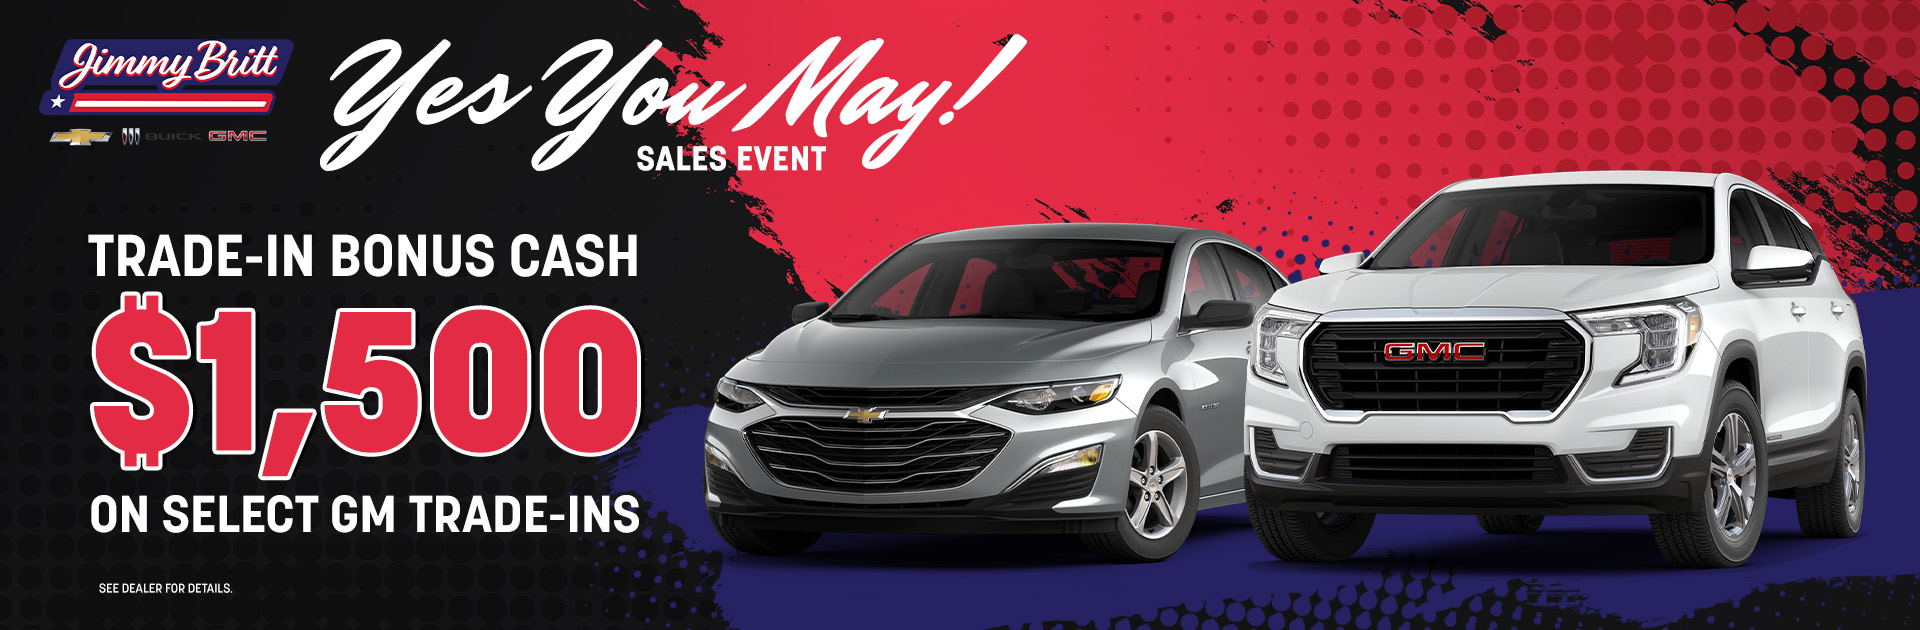 Trade-in bonus cash of $1,500 on select GM trade-ins